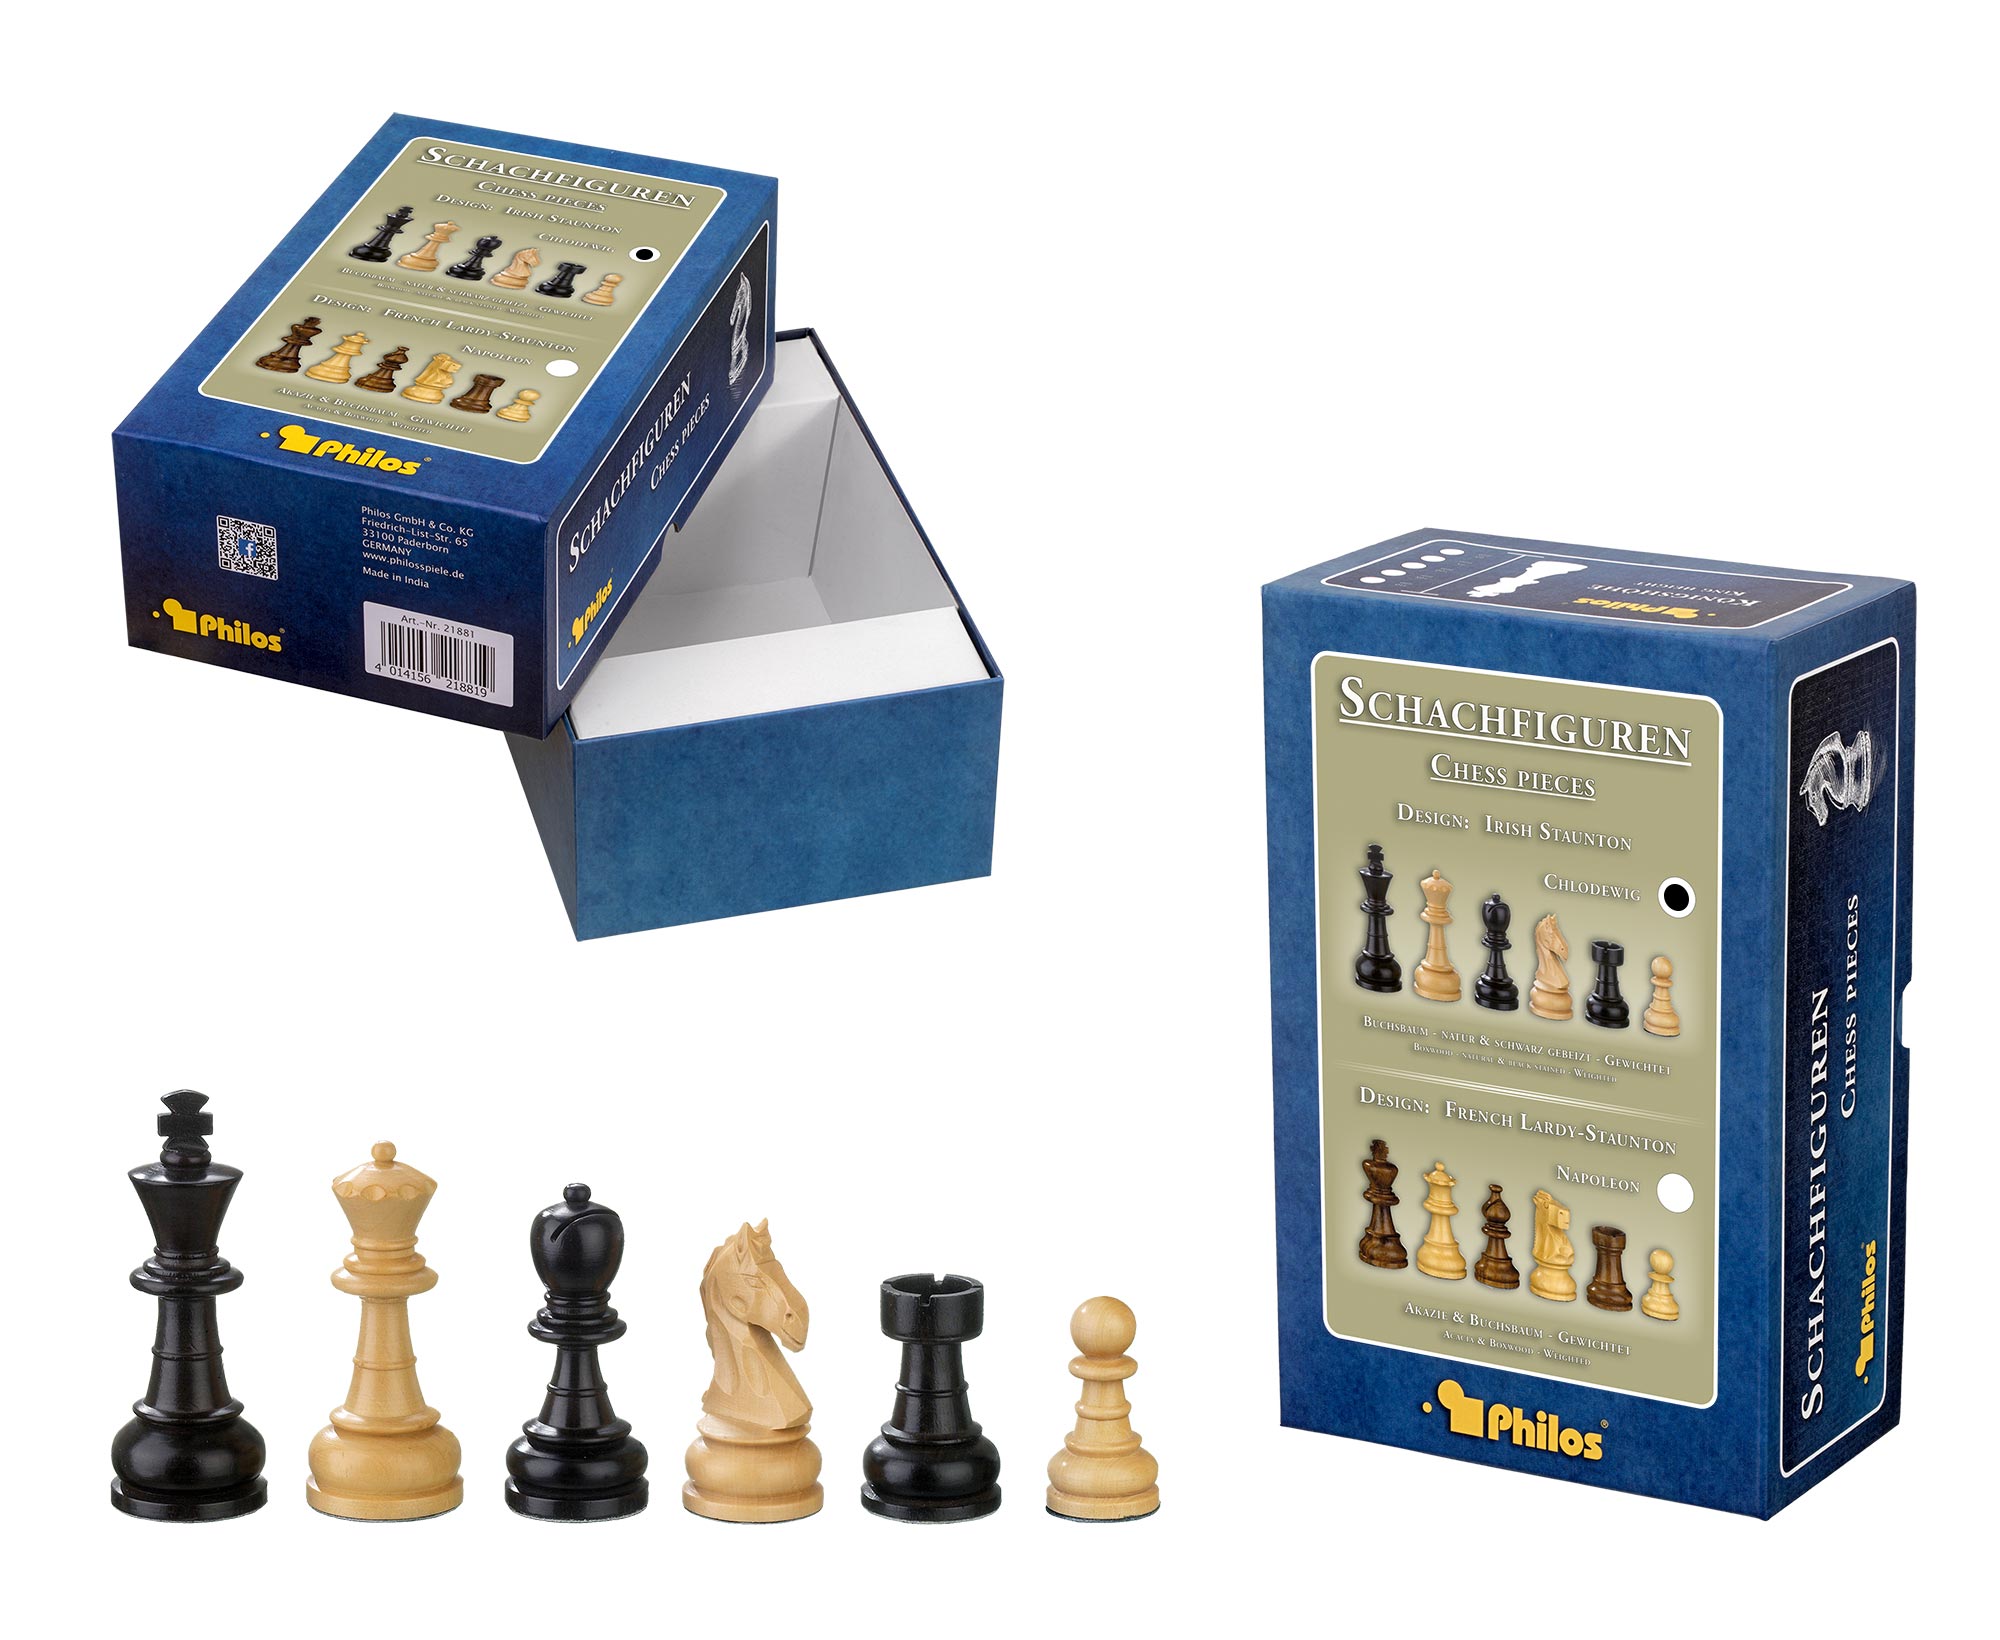 Chess pieces Chlodewig, king height 83 mm, in set-up box